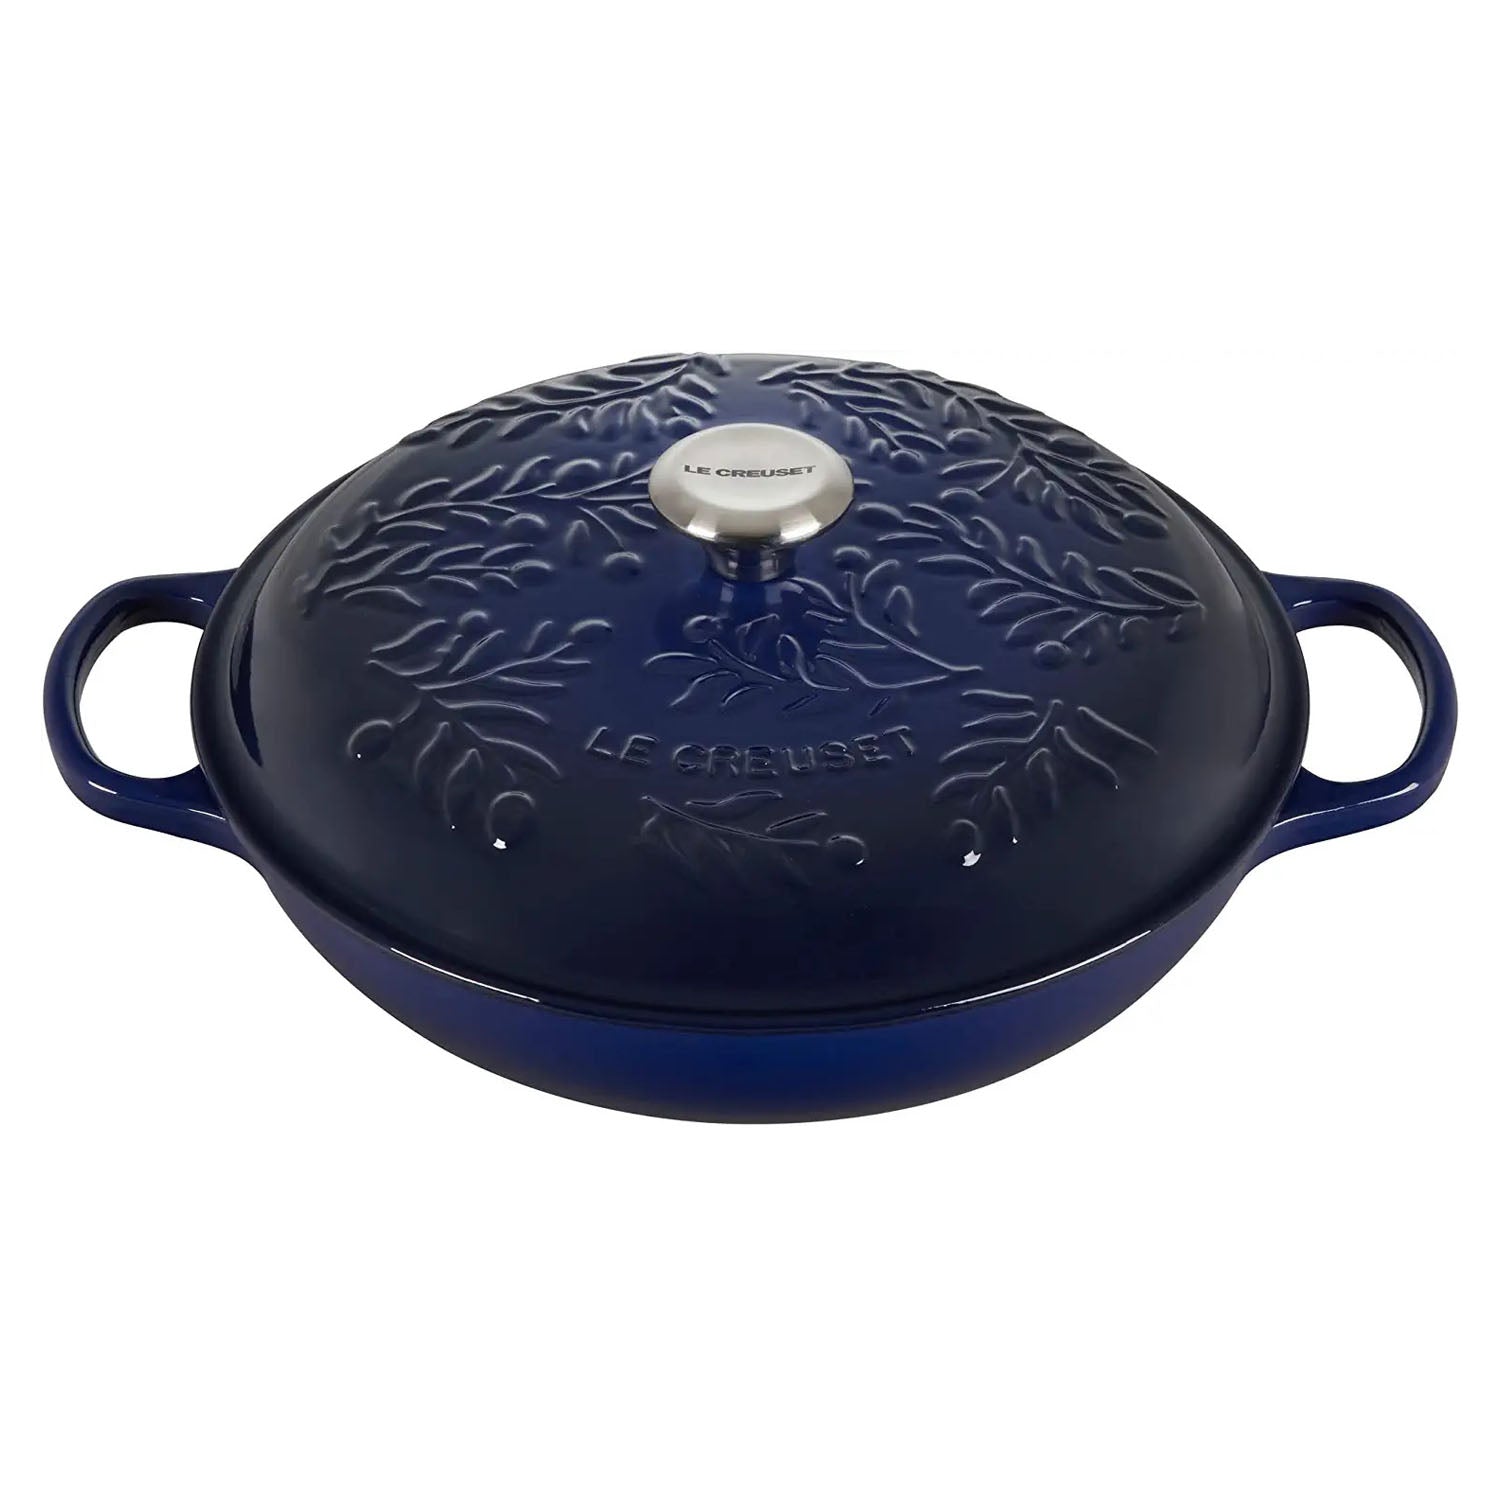 3.5 Qt. Signature Enameled Cast Iron Braiser with Stainless Steel